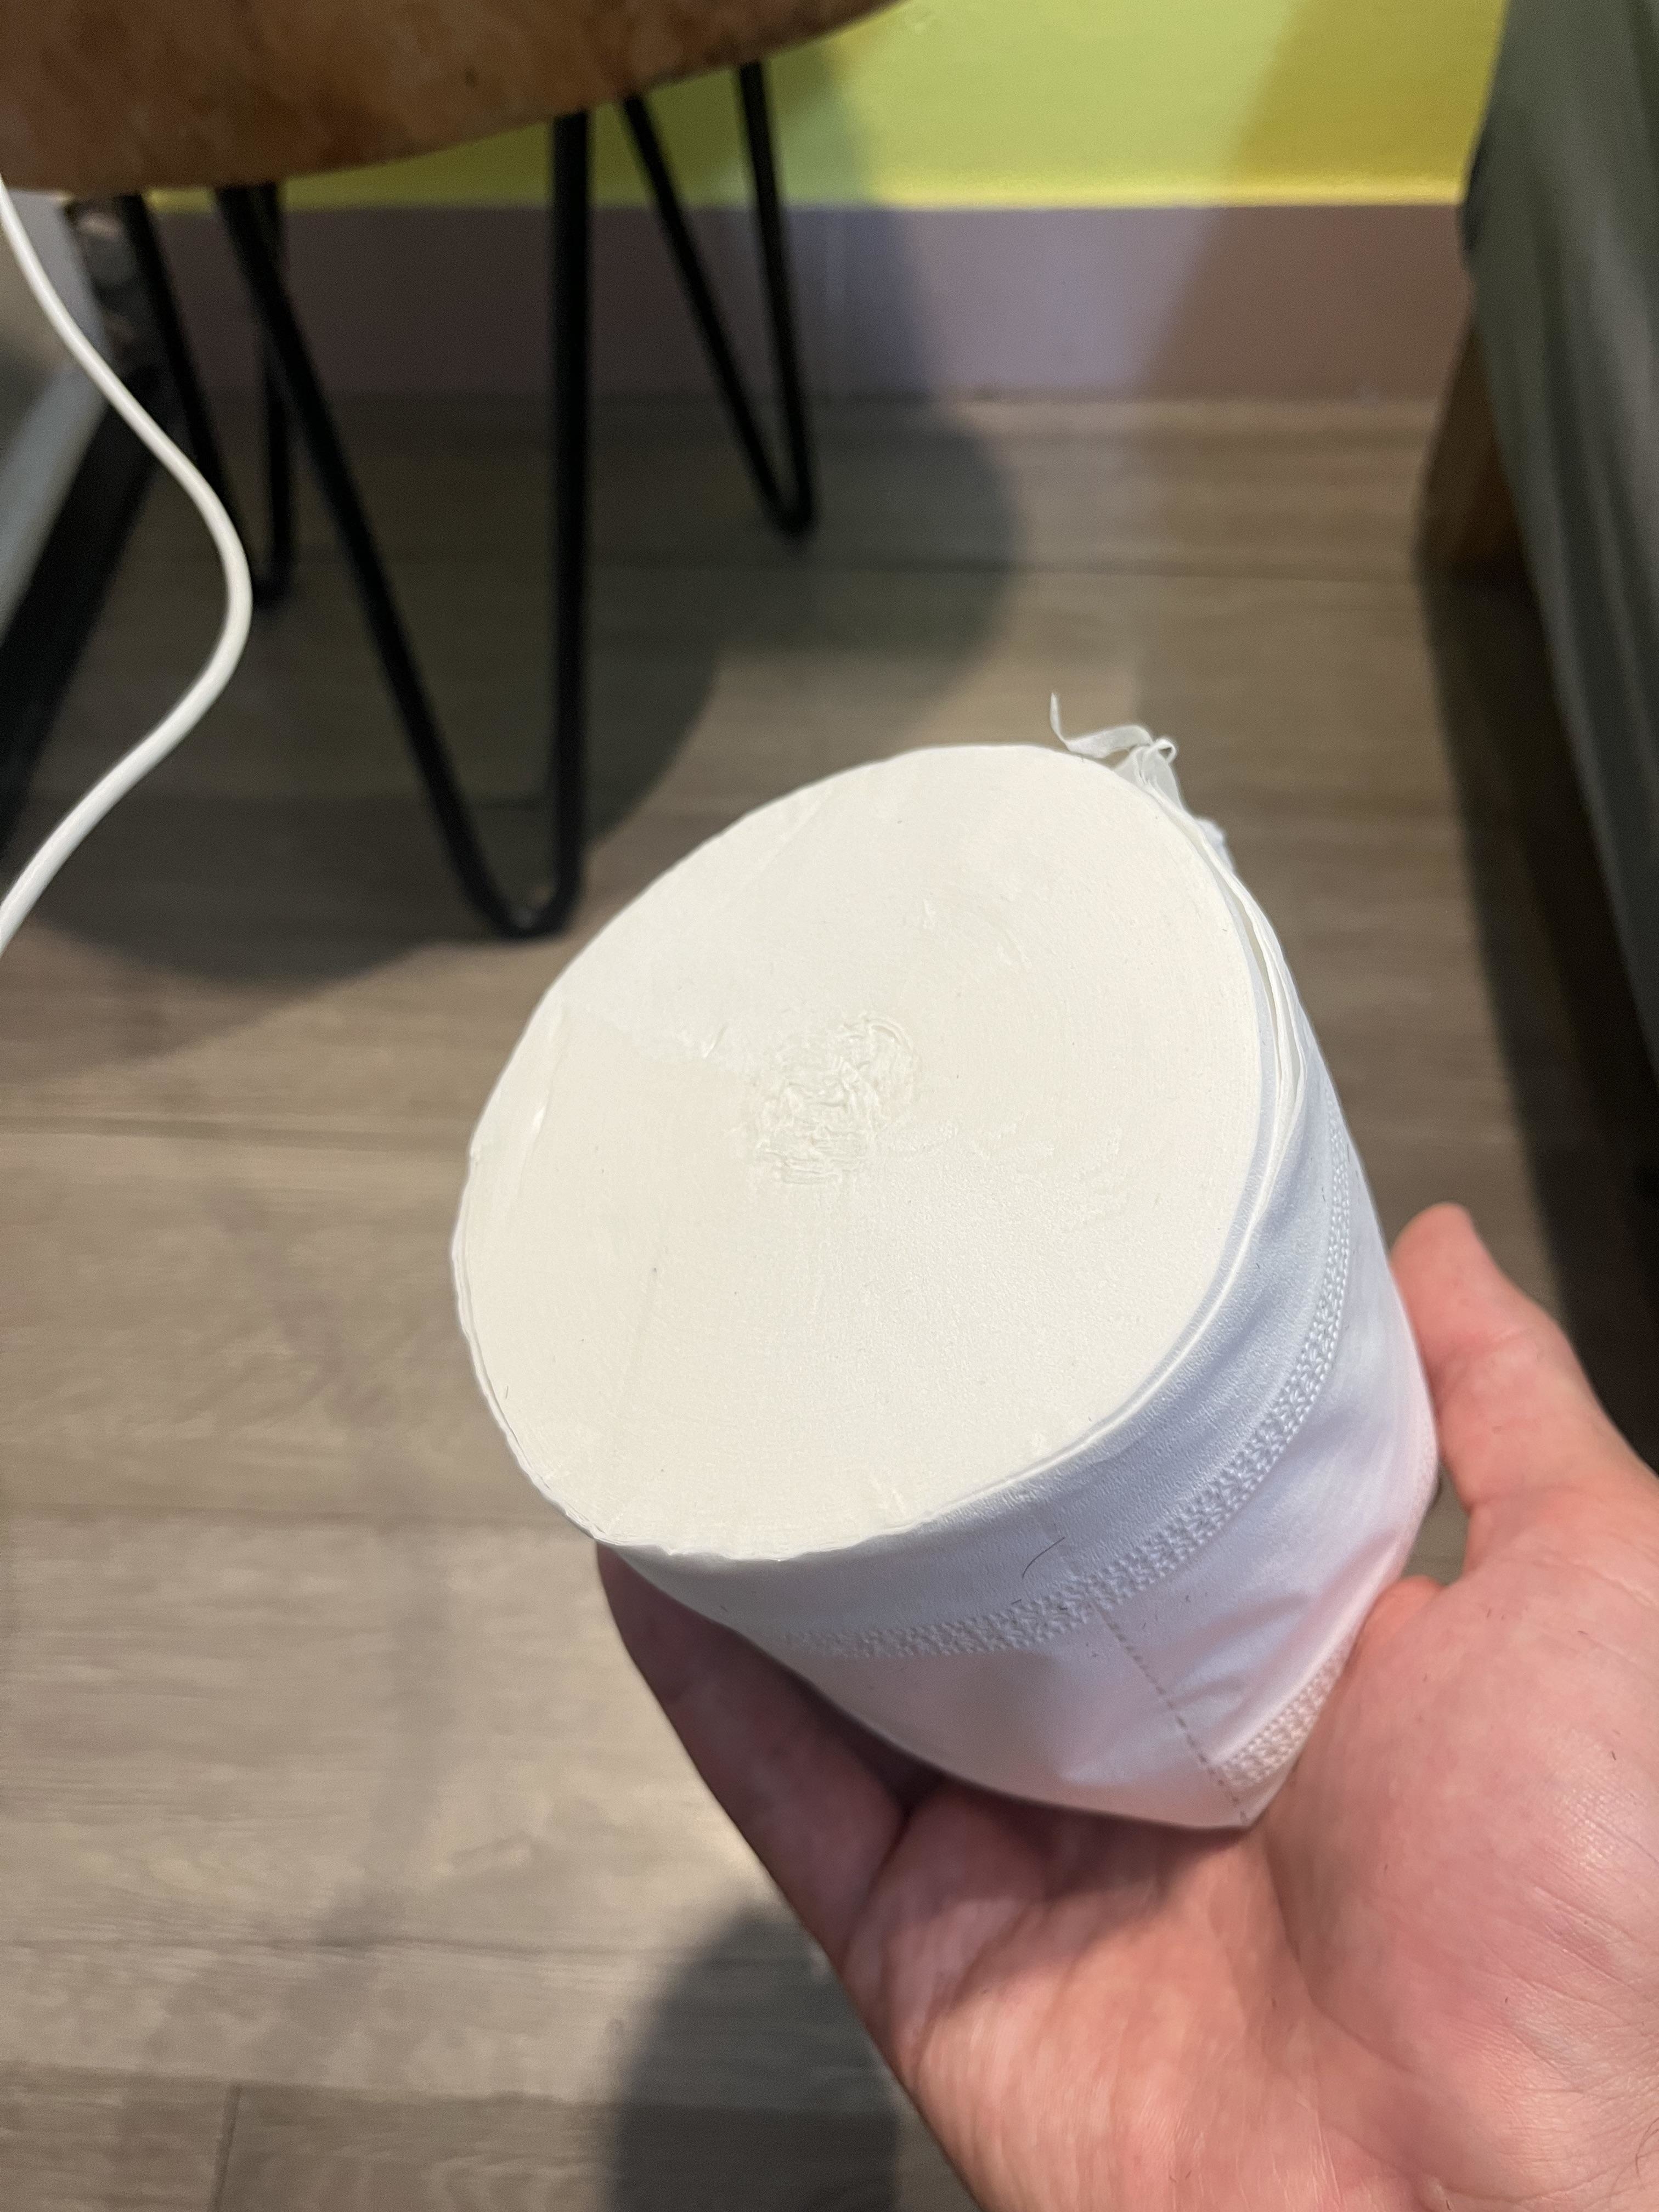 A toilet paper roll